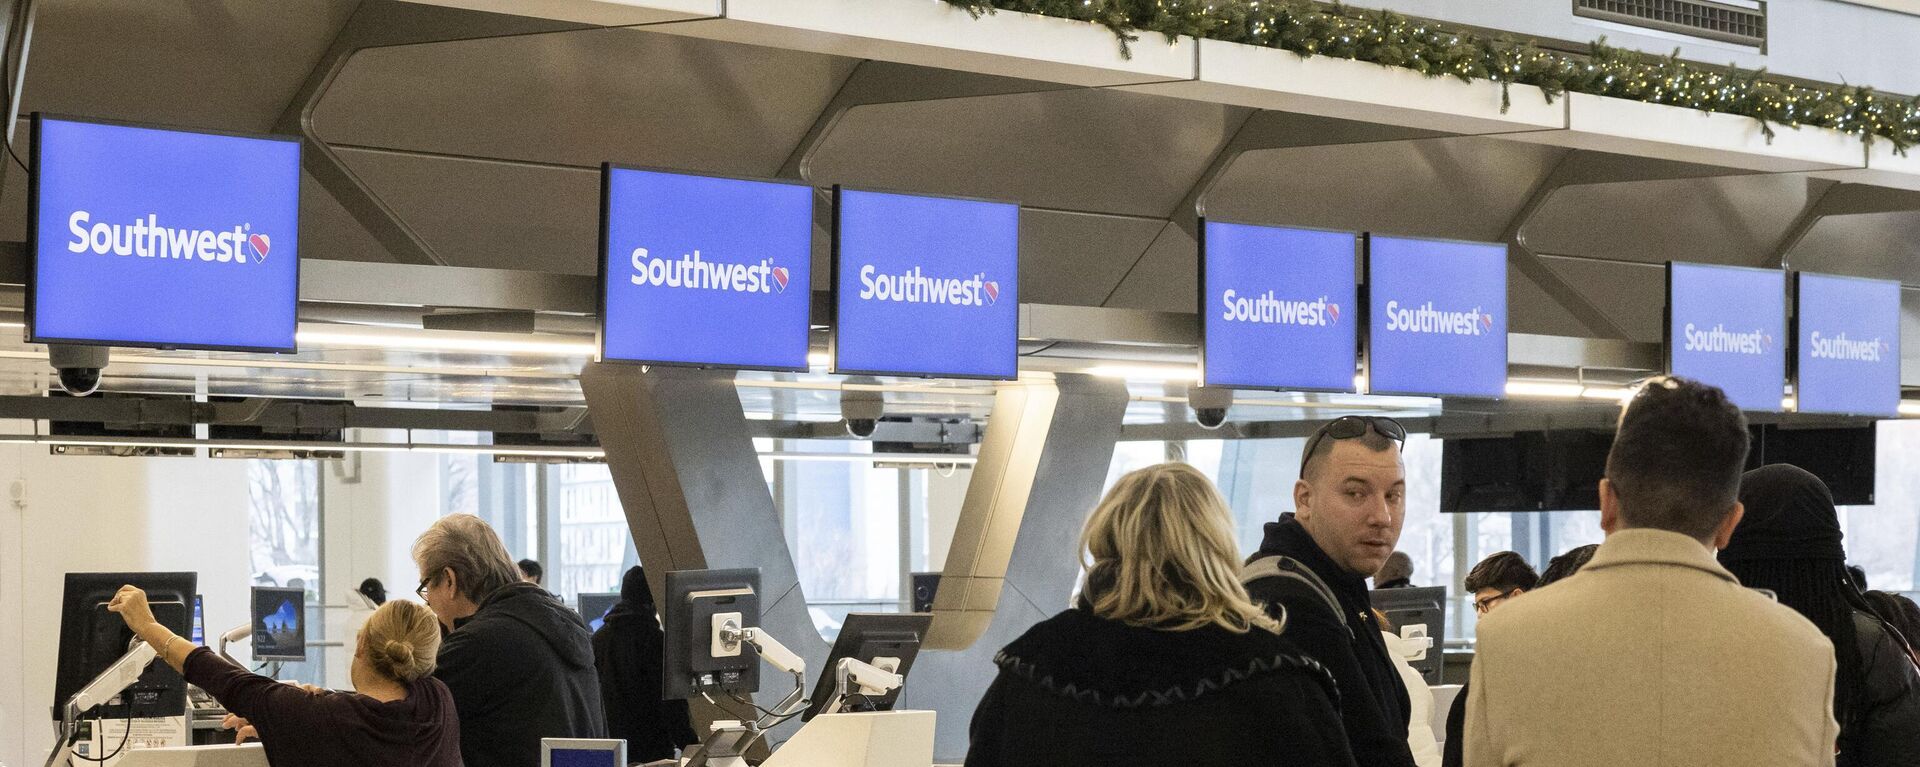 Passengers wait in line to check in for their flights at Southwest Airlines service desk at LaGuardia Airport, Tuesday, Dec. 27, 2022, in New York.  - Sputnik International, 1920, 07.03.2023